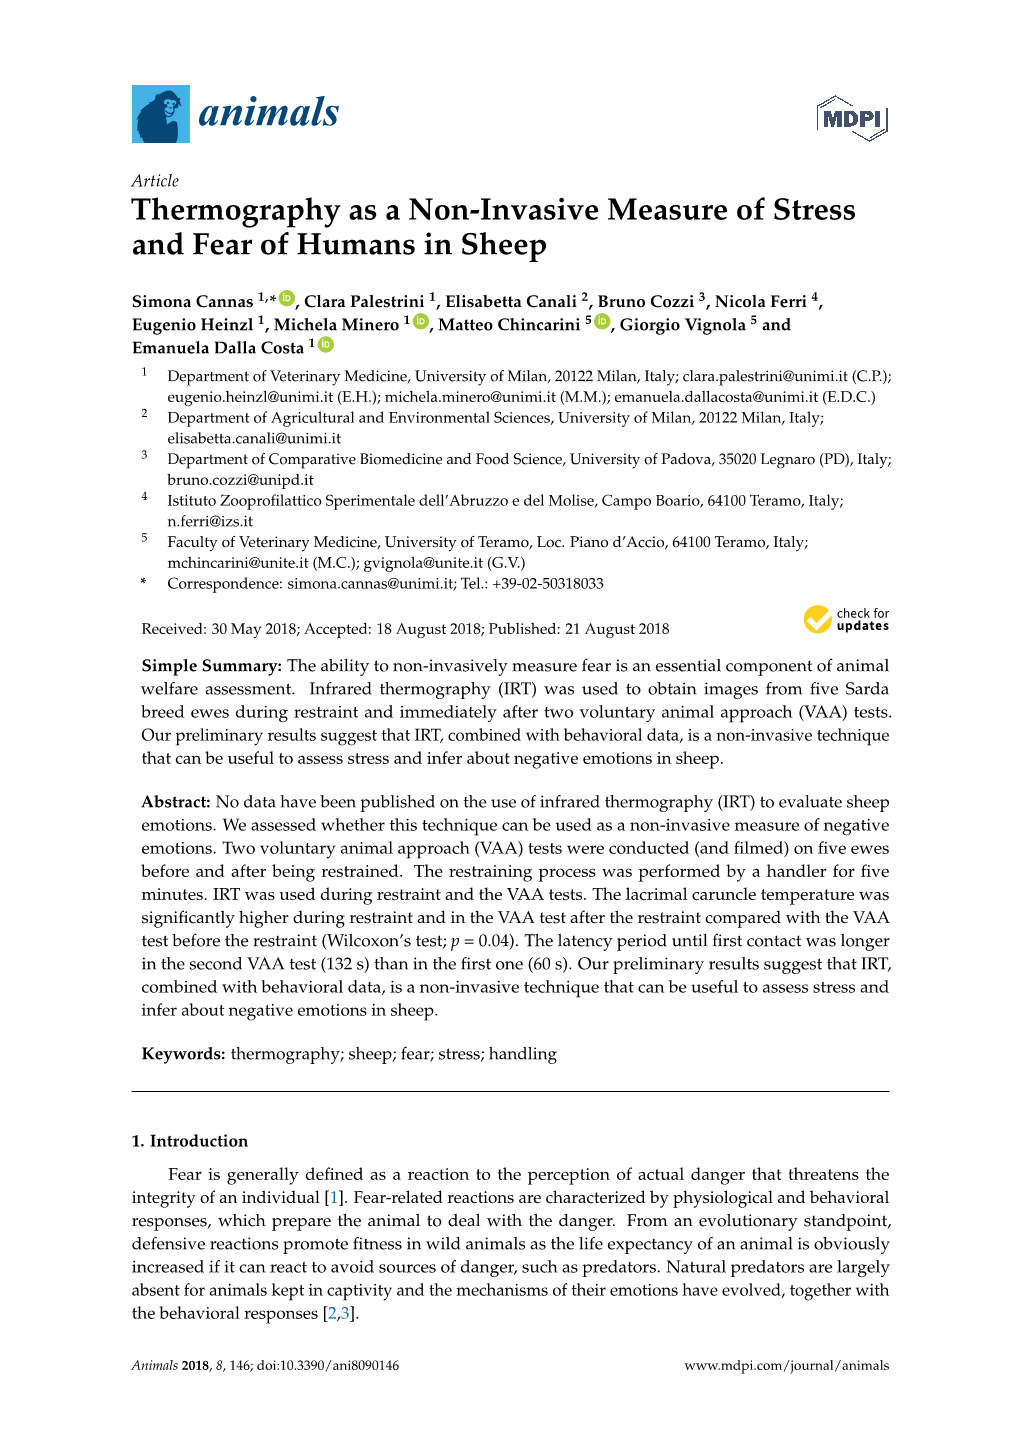 Thermography As a Non-Invasive Measure of Stress and Fear of Humans in Sheep